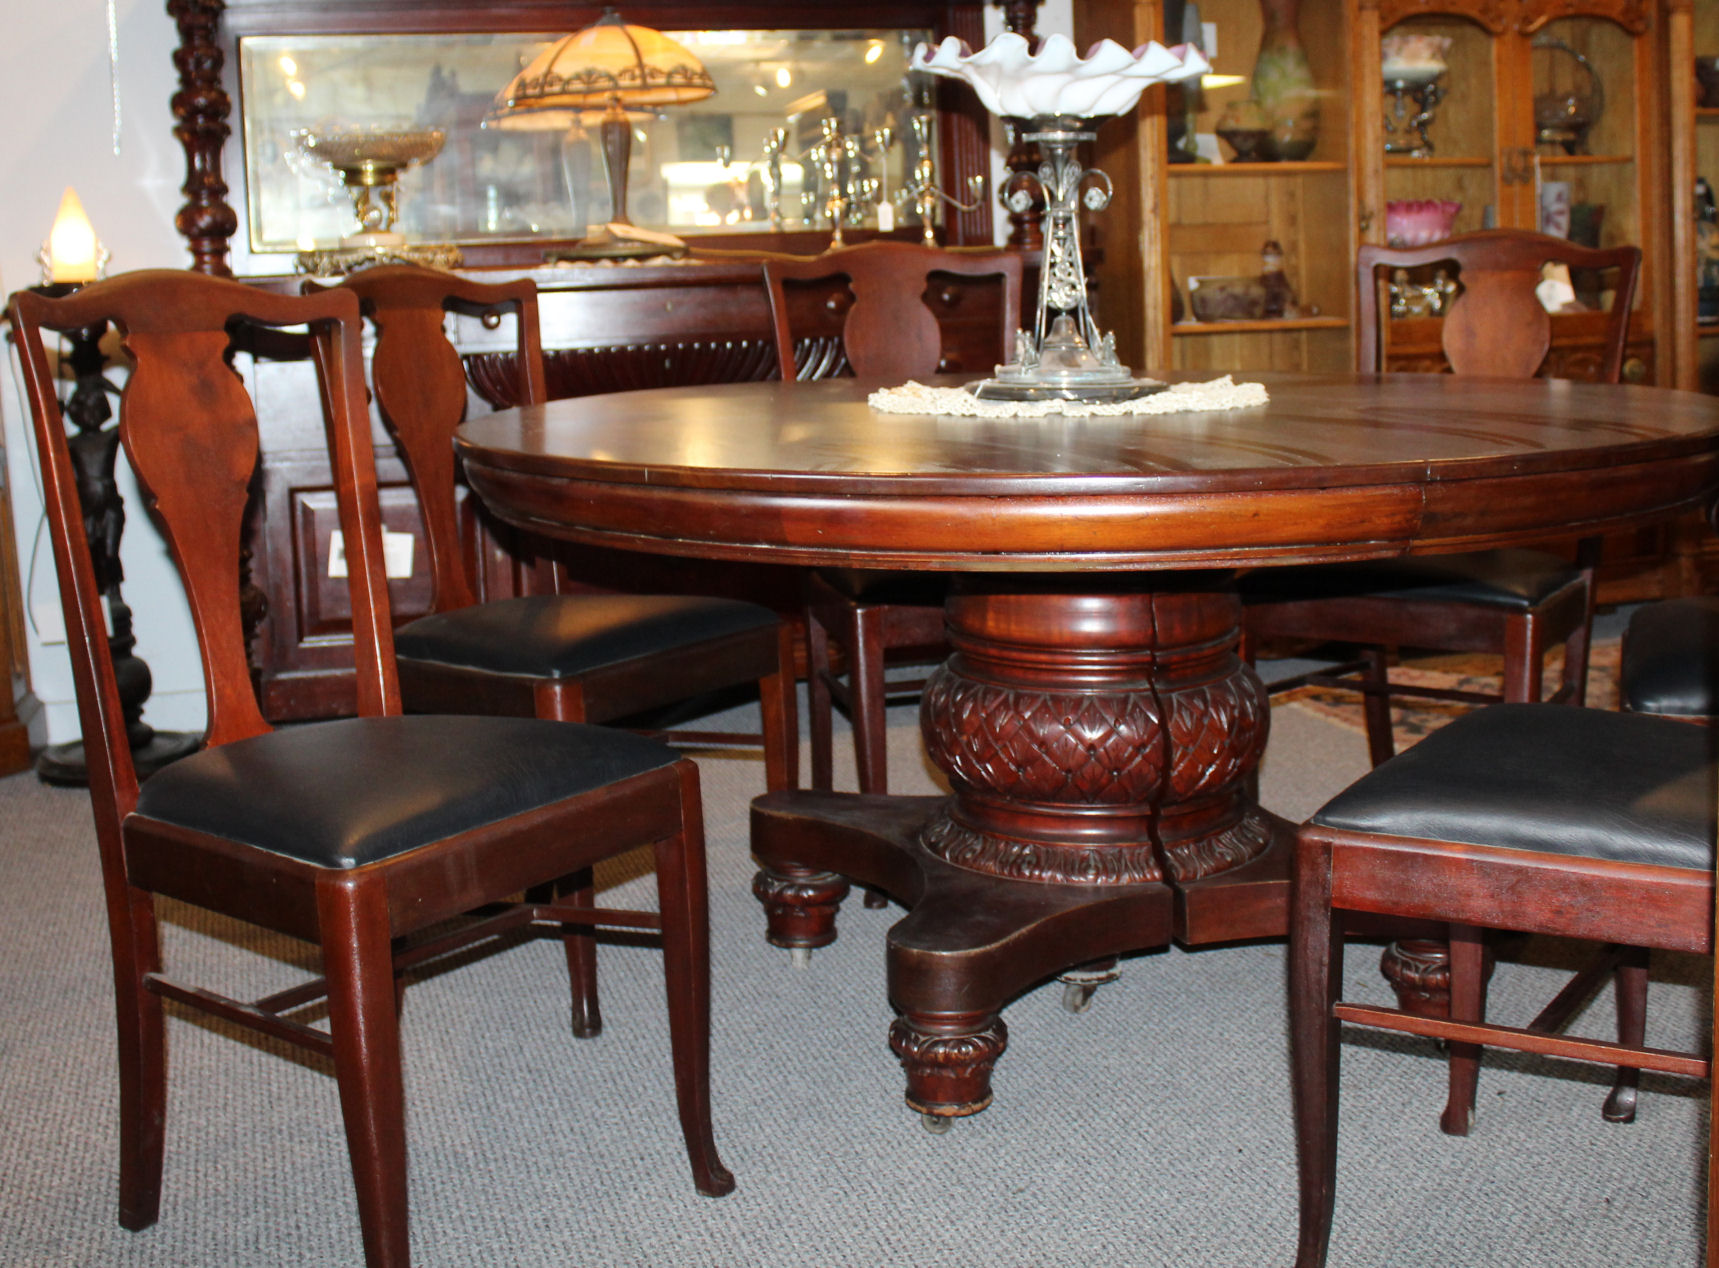 Bargain John S Antiques Antique, Mahogany Round Table And Chairs